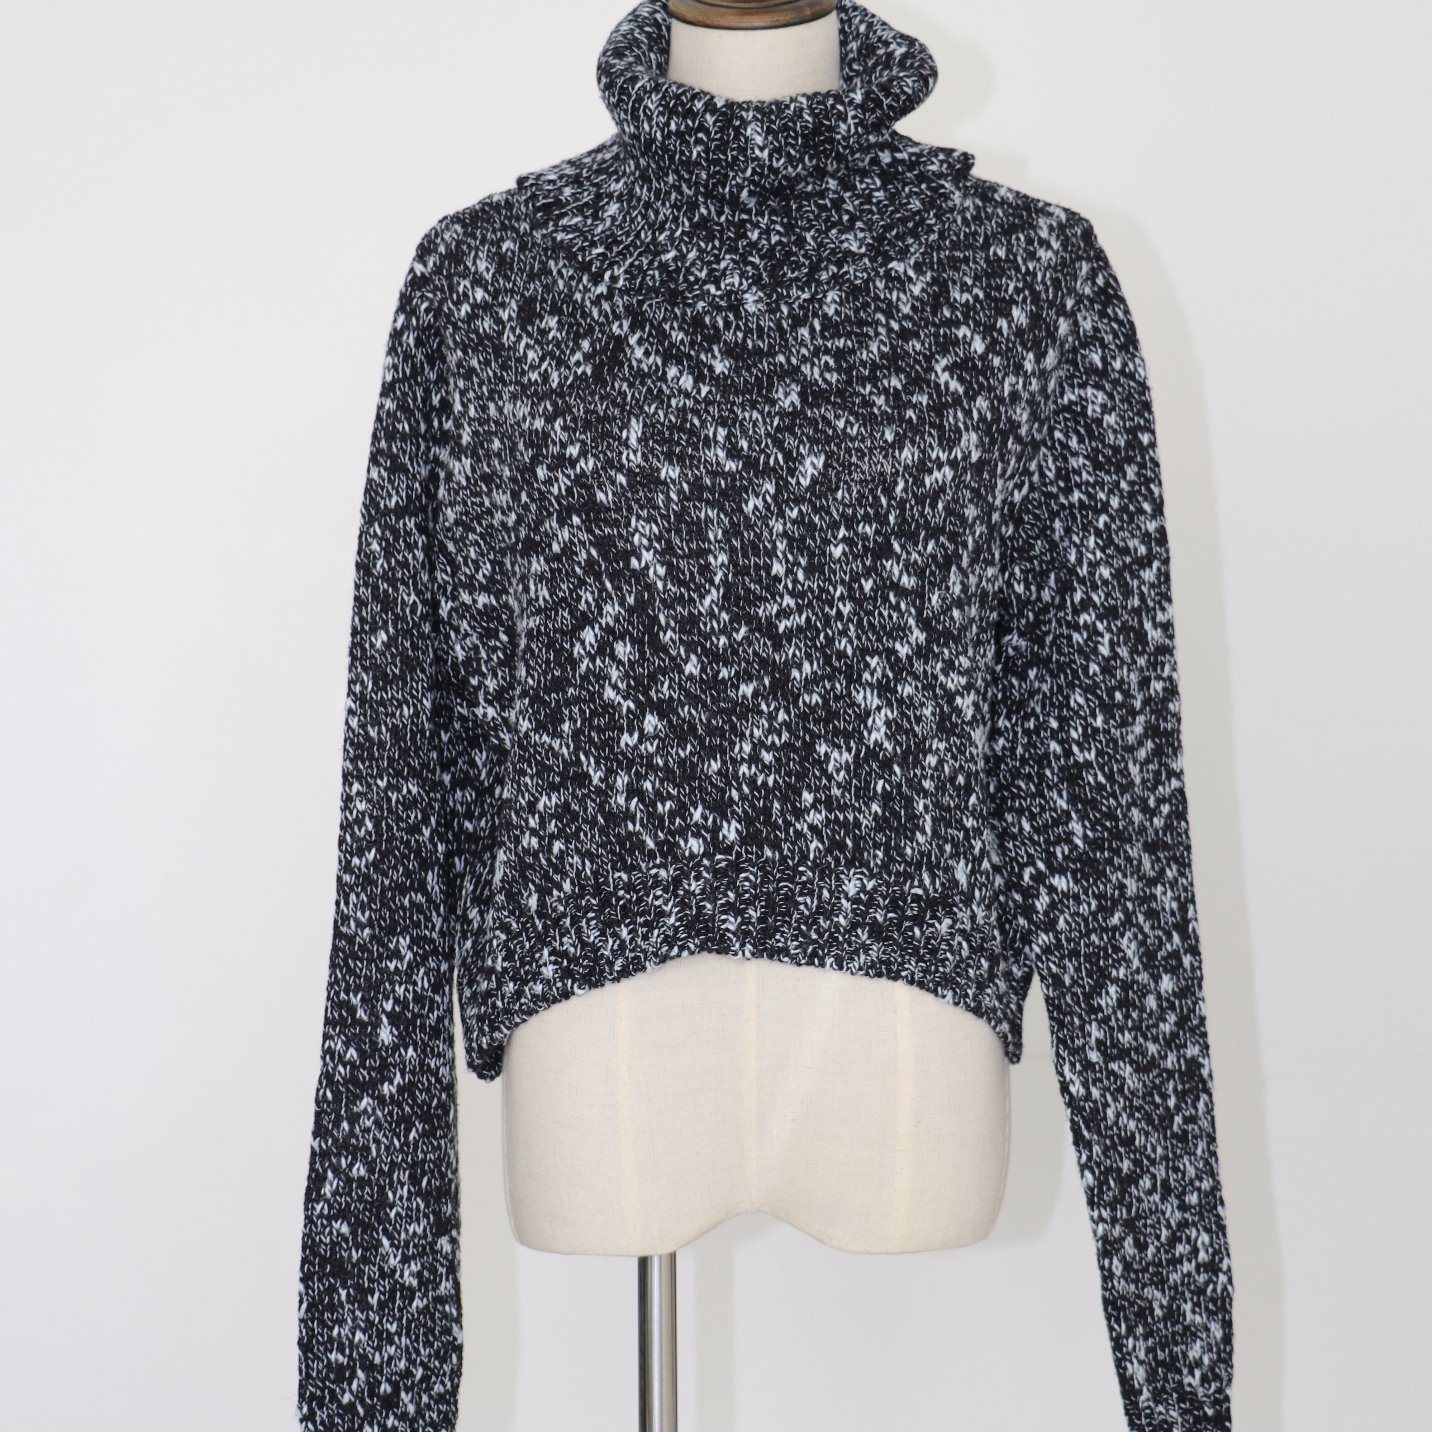 Fashionable Heathered Sweater Top in Heavy Guage with Tutle Neck and Long Sleeves